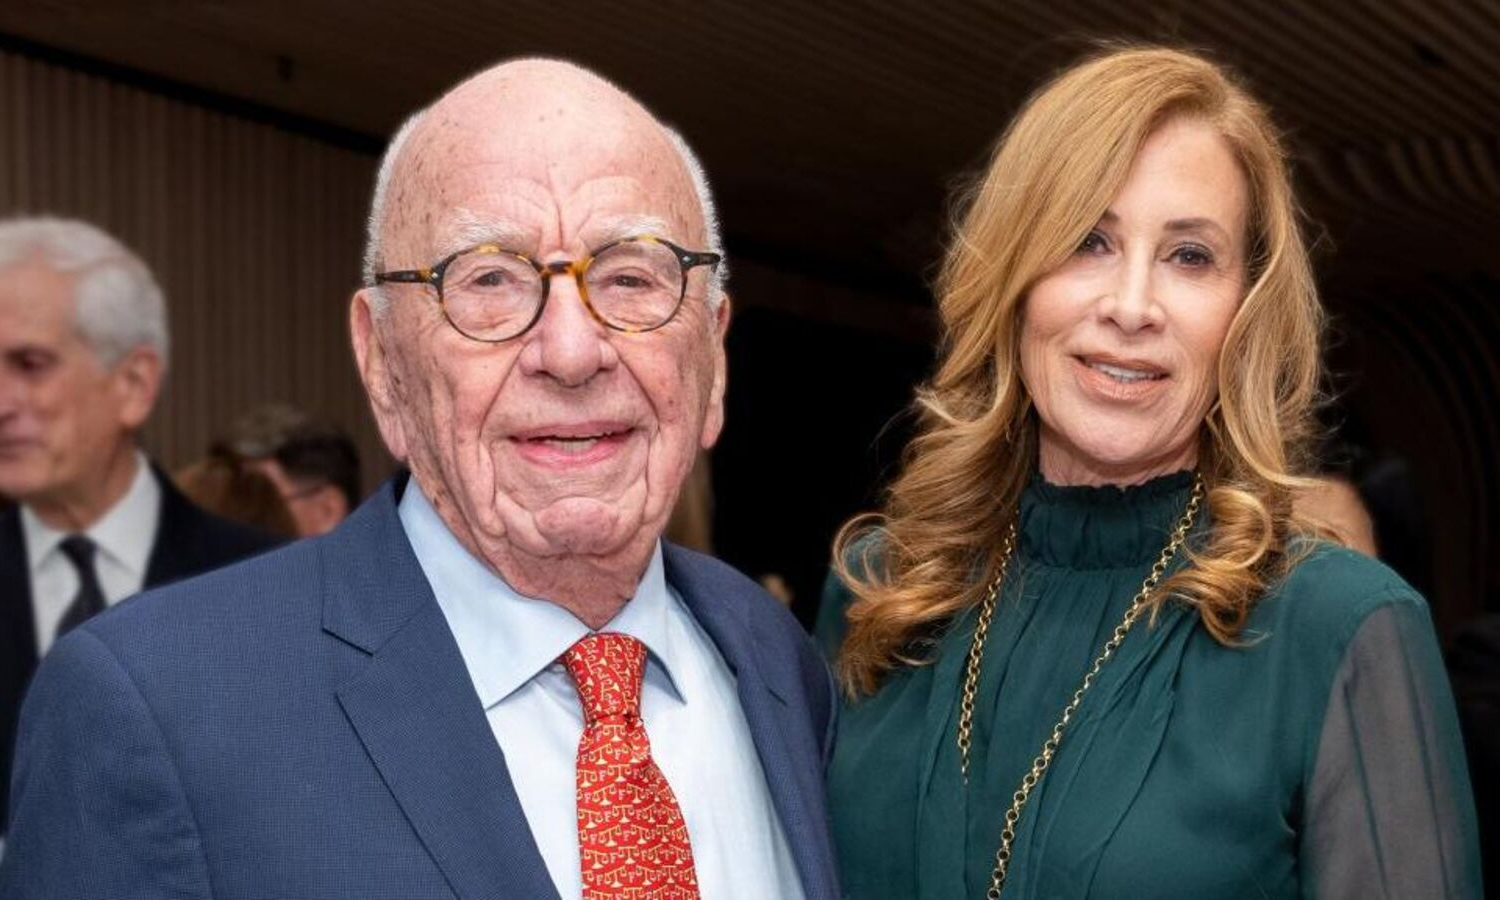 International media magnate Rupert Murdoch is getting married for the 5th time at the age of 92